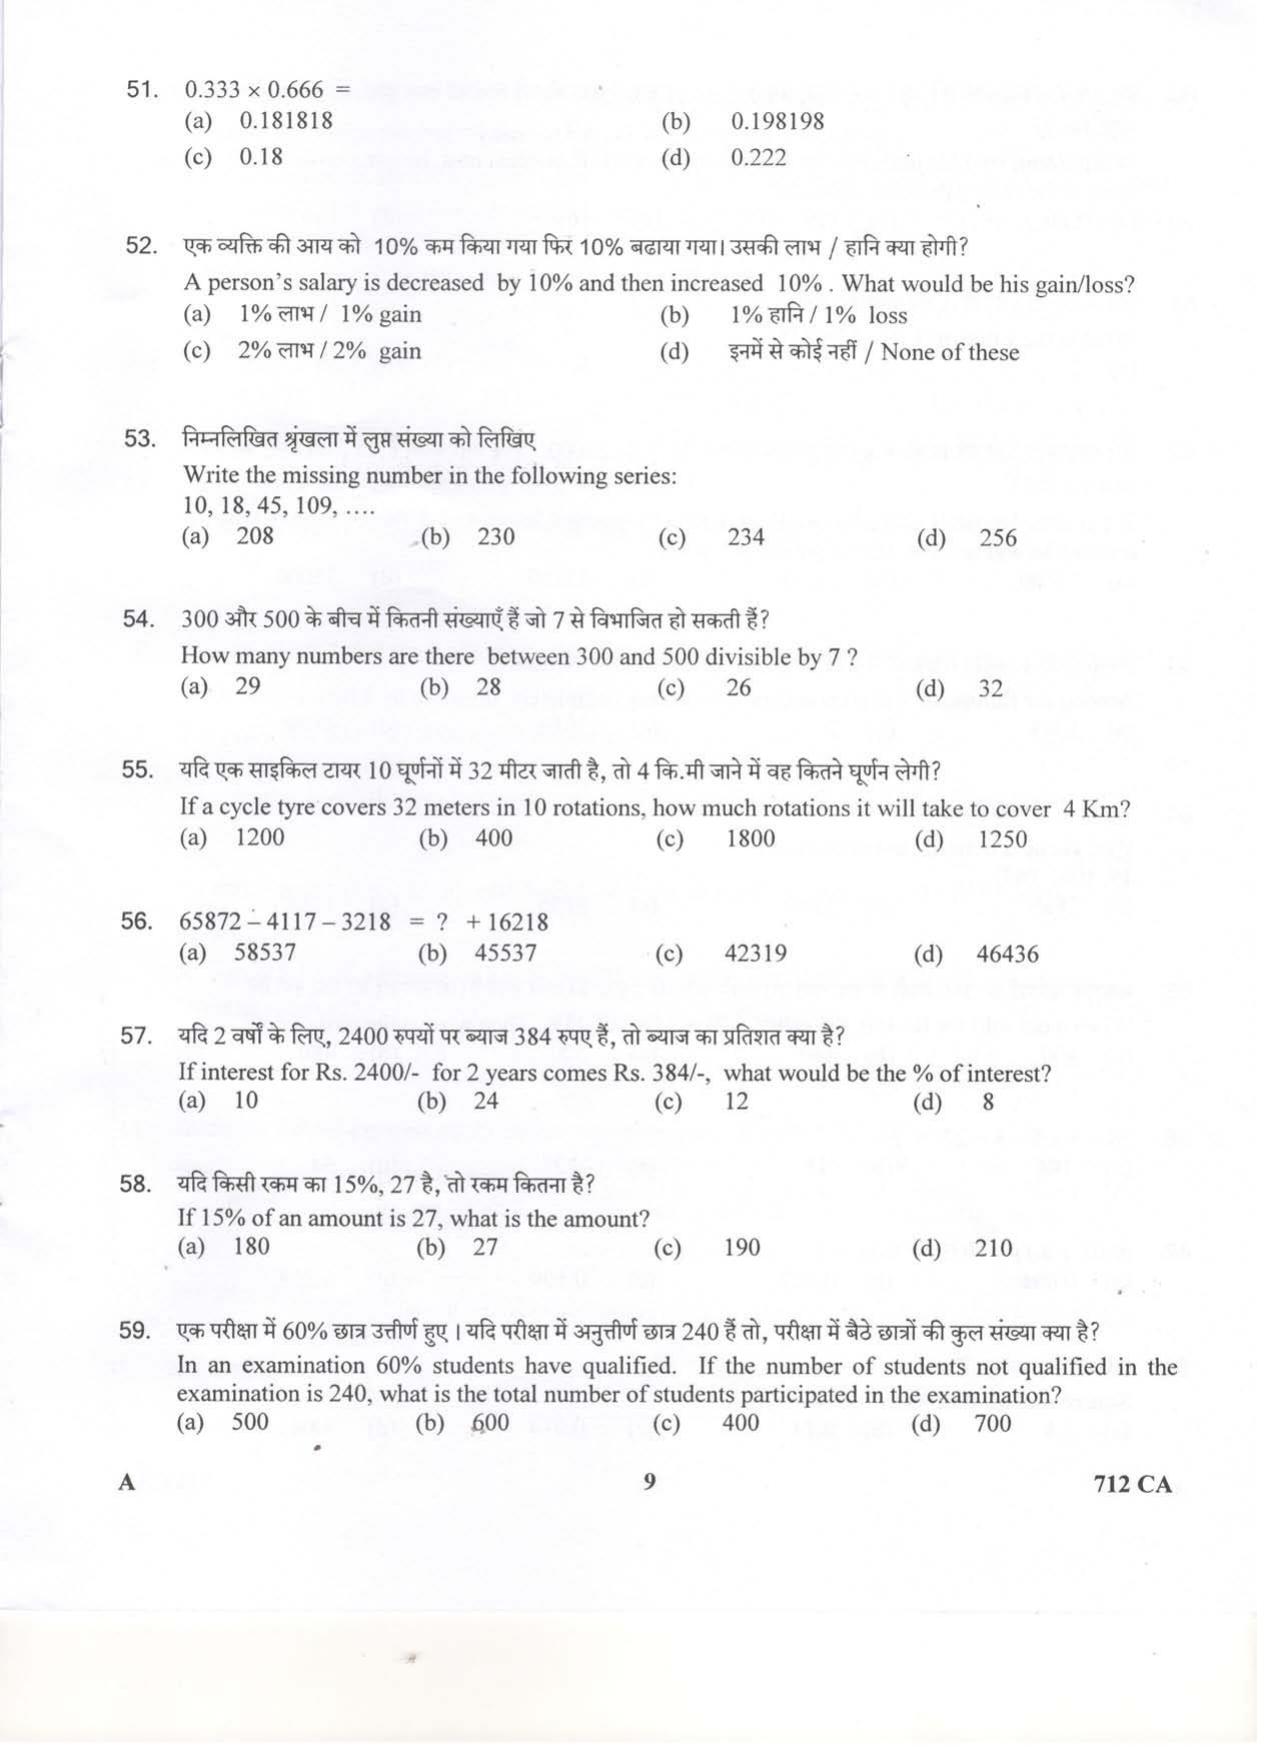 LPSC Catering Attendant ‘A’ 2019 Question Paper - Page 9